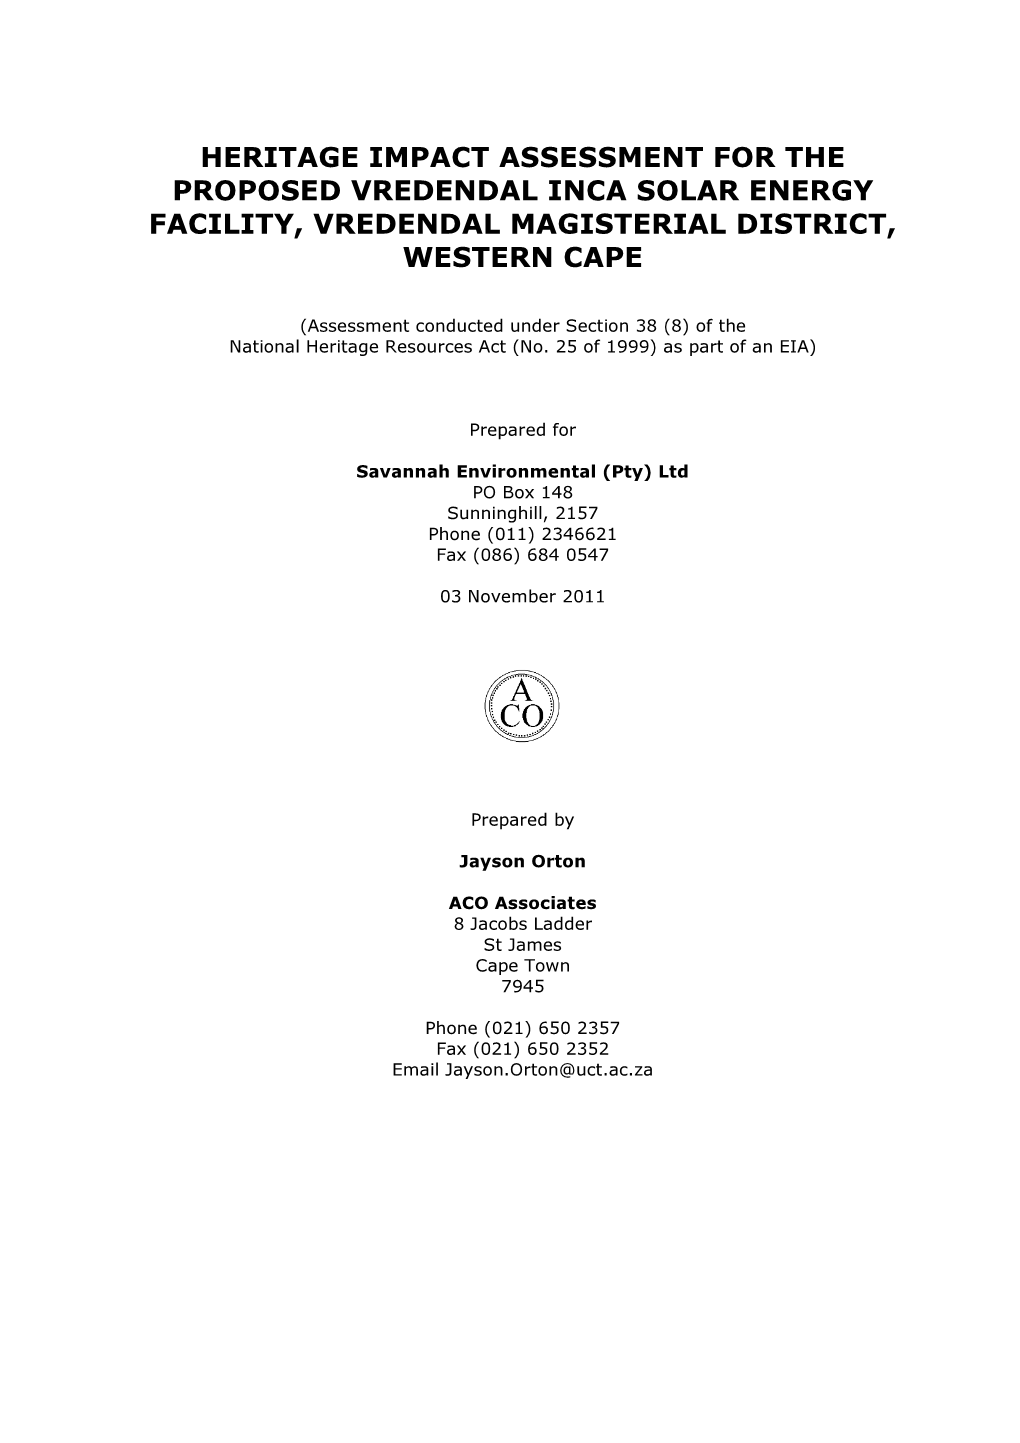 Heritage Impact Assessment for the Proposed Vredendal Inca Solar Energy Facility, Vredendal Magisterial District, Western Cape